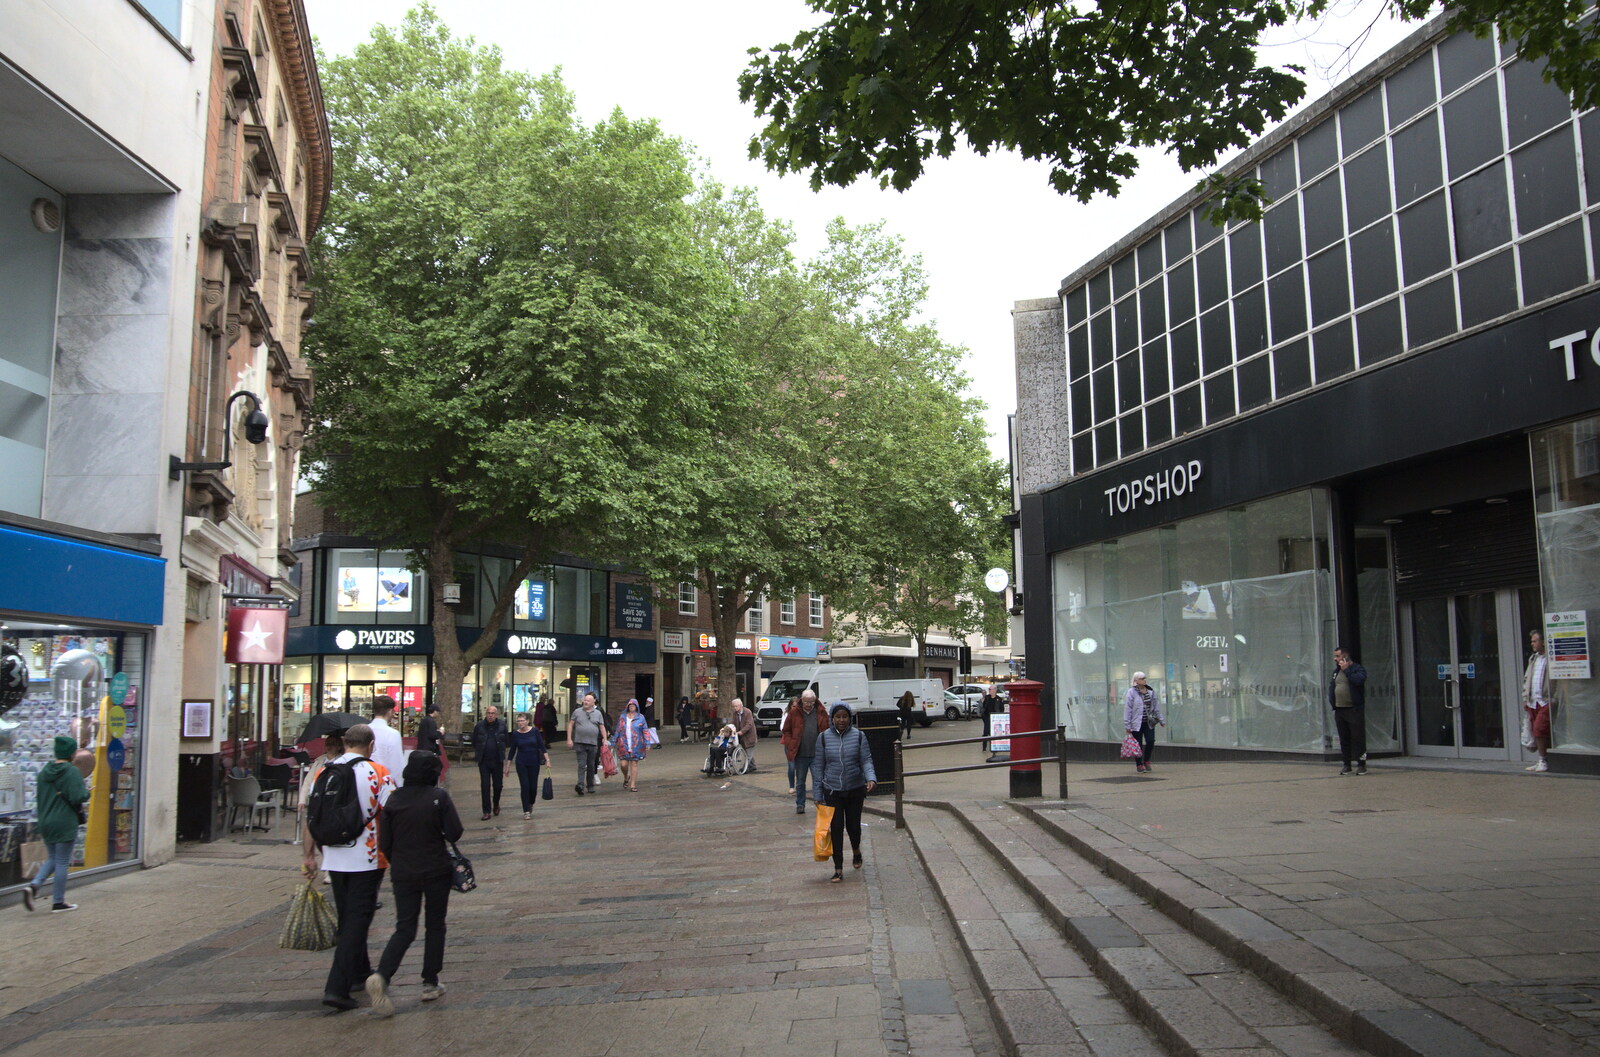 The derelicty Topshop on Haymarket from Discovering the Hidden City: Norwich, Norfolk - 23rd May 2022